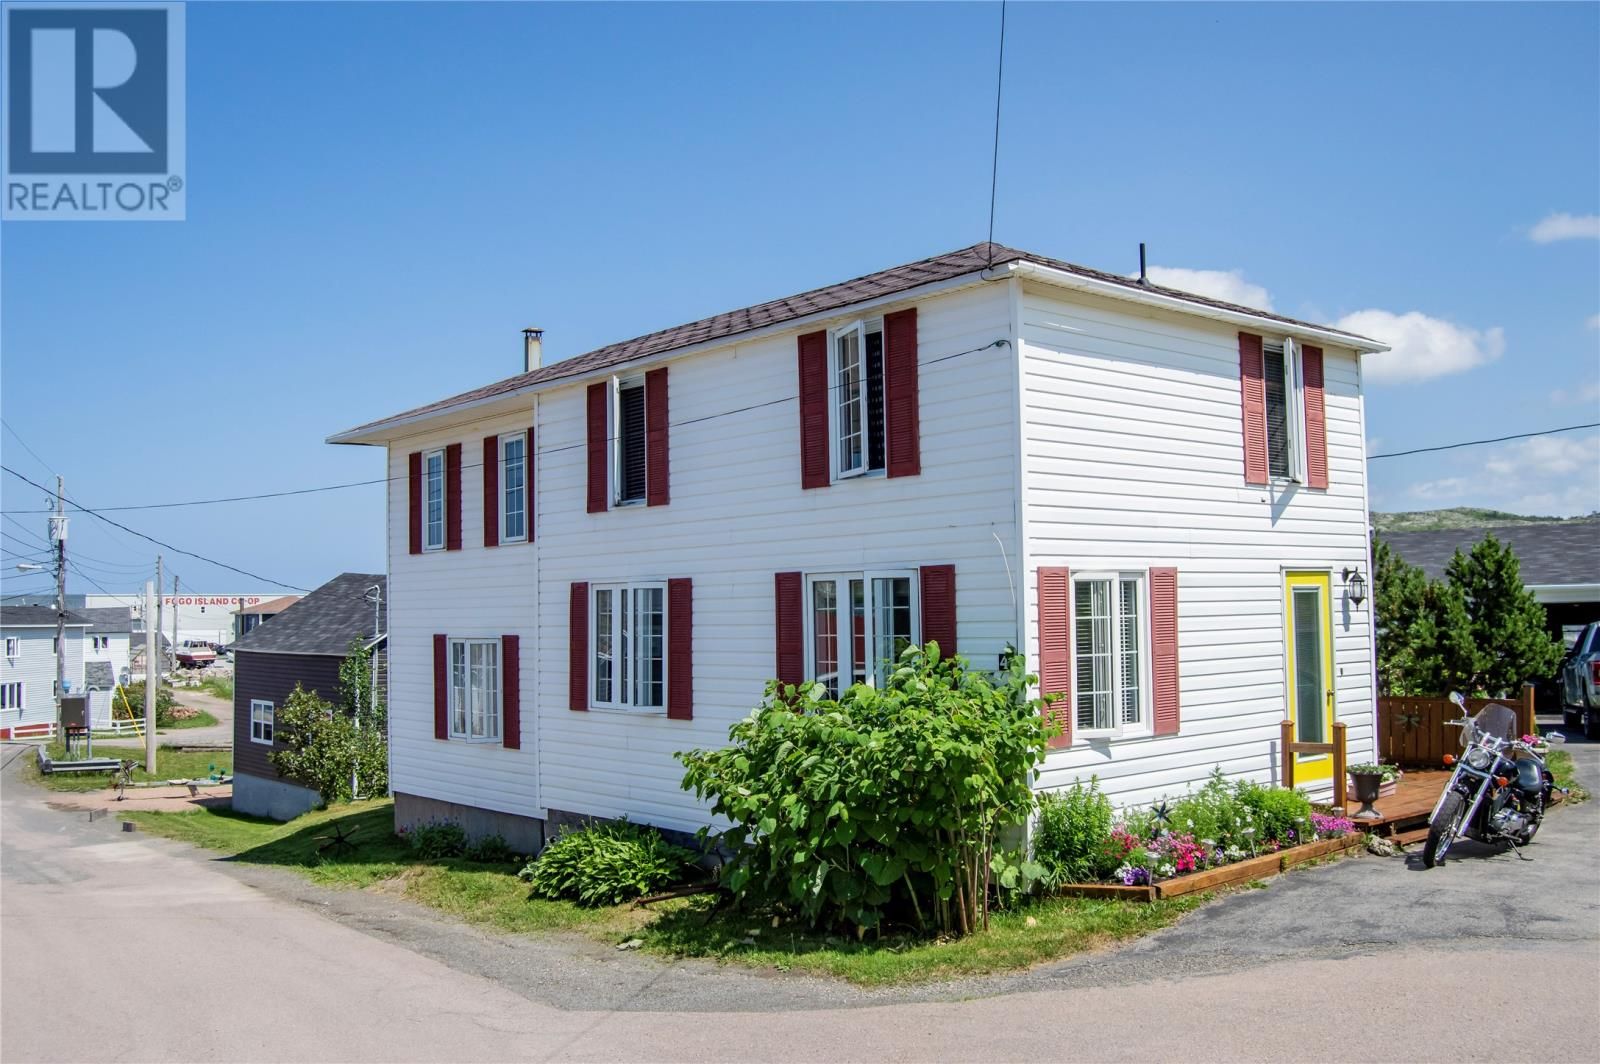 Main Photo: 4 Little Harbour Road in Fogo: House for sale : MLS®# 1261106